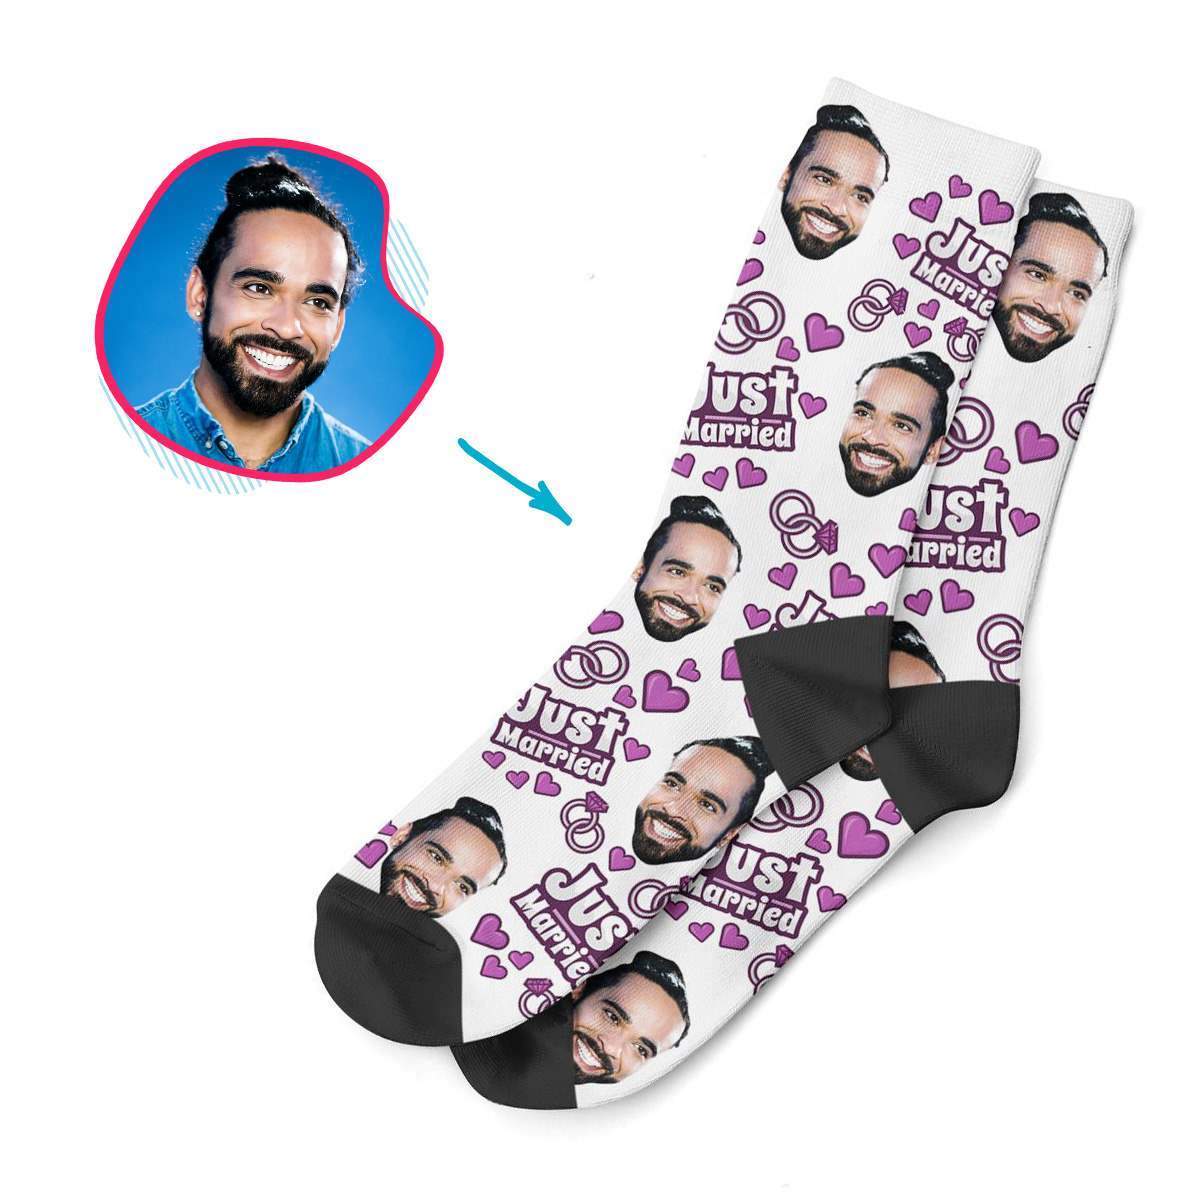 white Just Married socks personalized with photo of face printed on them